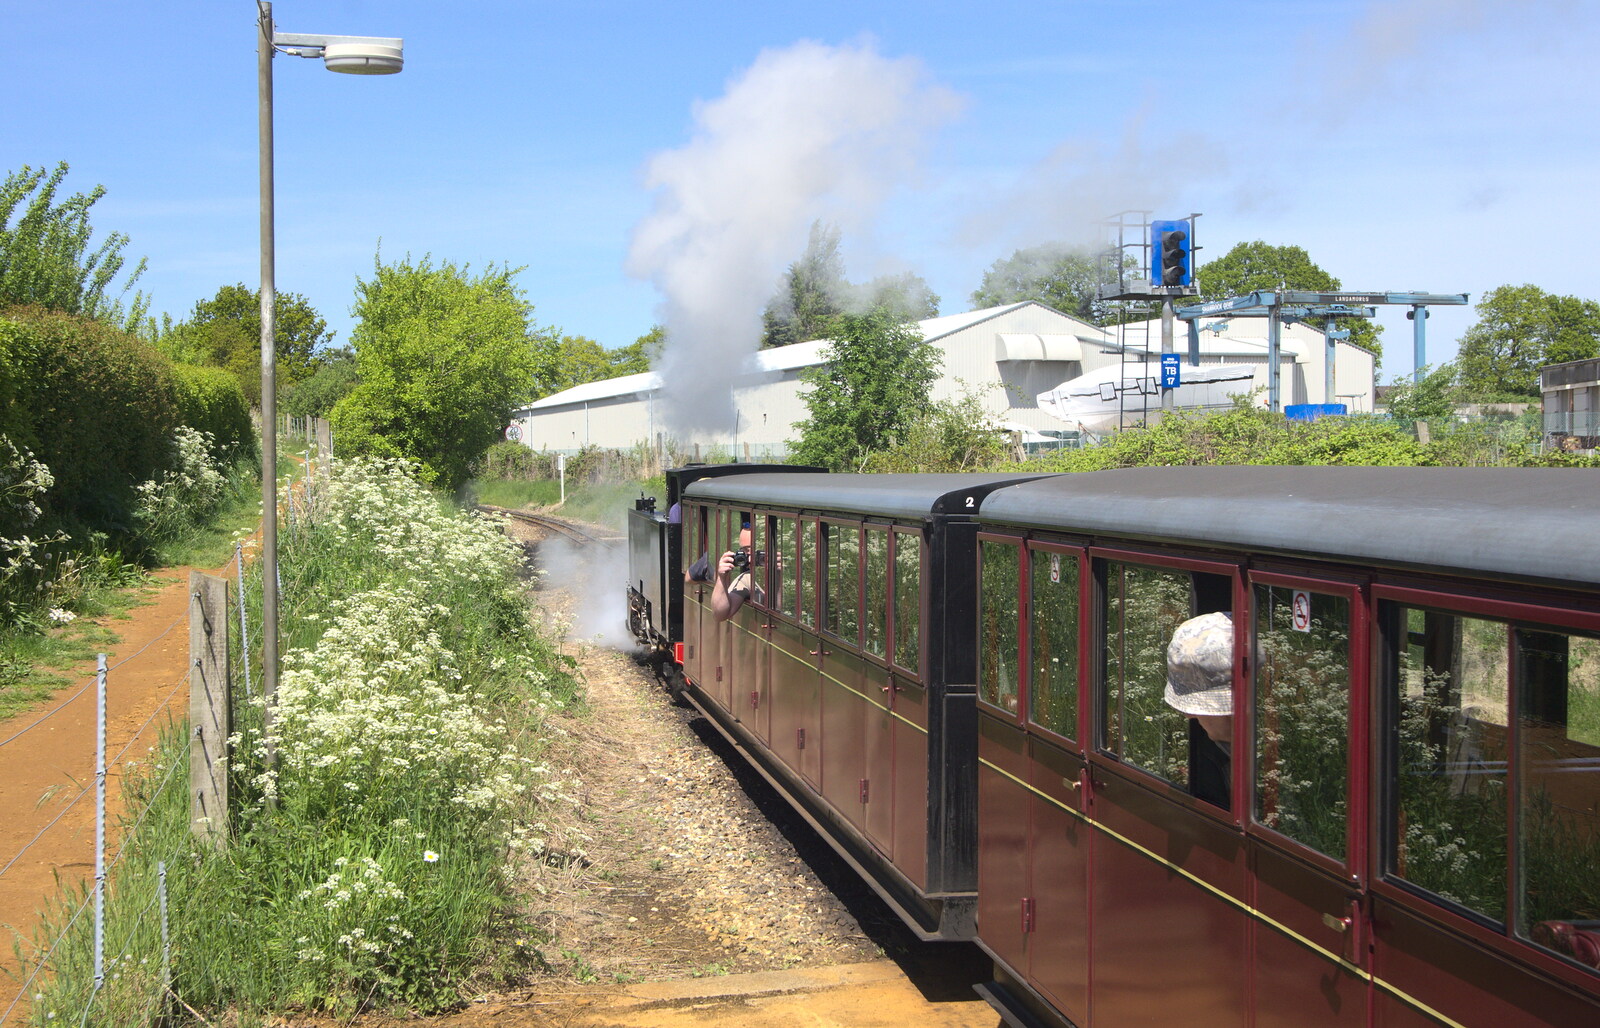 The train steams off on another trip from The Bure Valley Railway, Aylsham, Norfolk - 26th May 2013